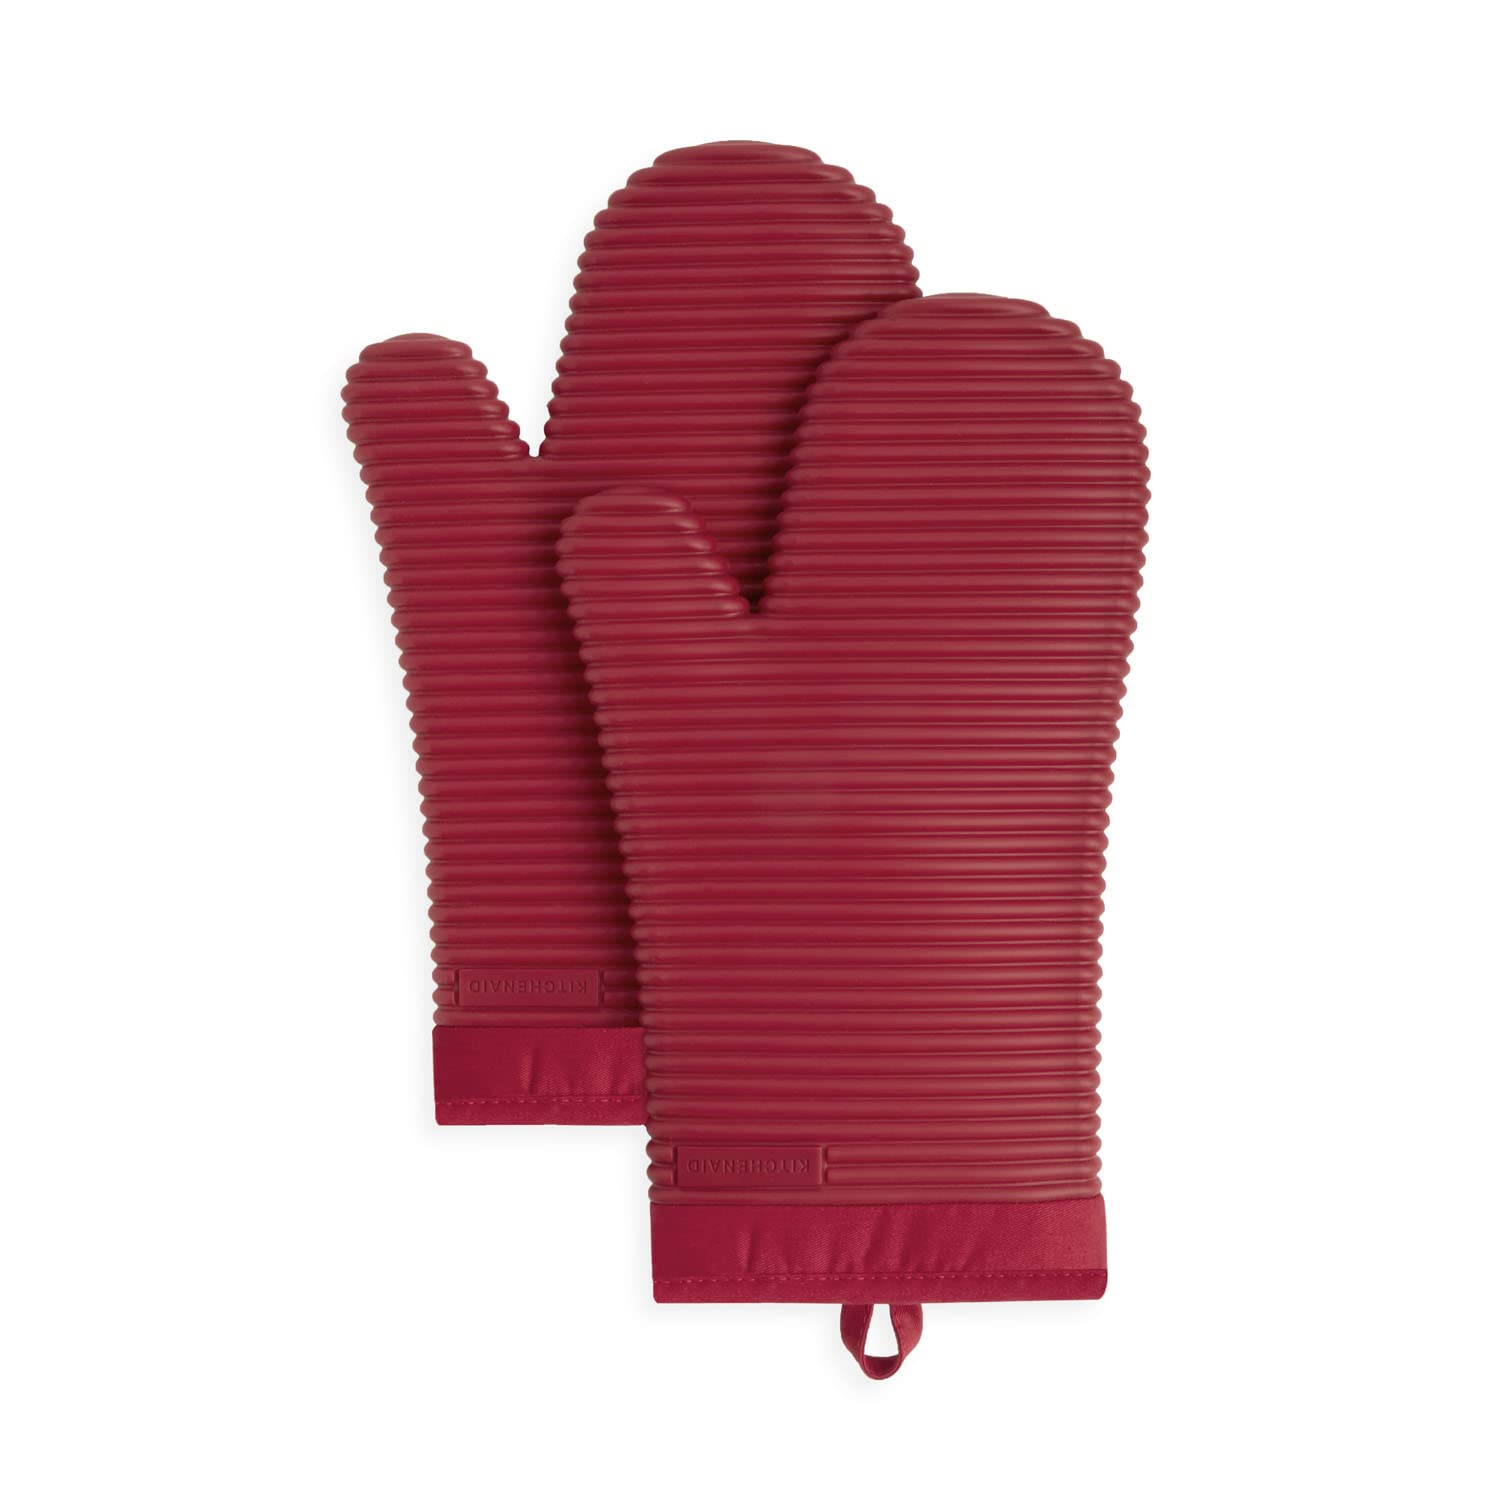 2-Count KitchenAid Ribbed Soft Silicone Oven Mitt Set (Red) $11.43 & More + Free Ship w/Prime